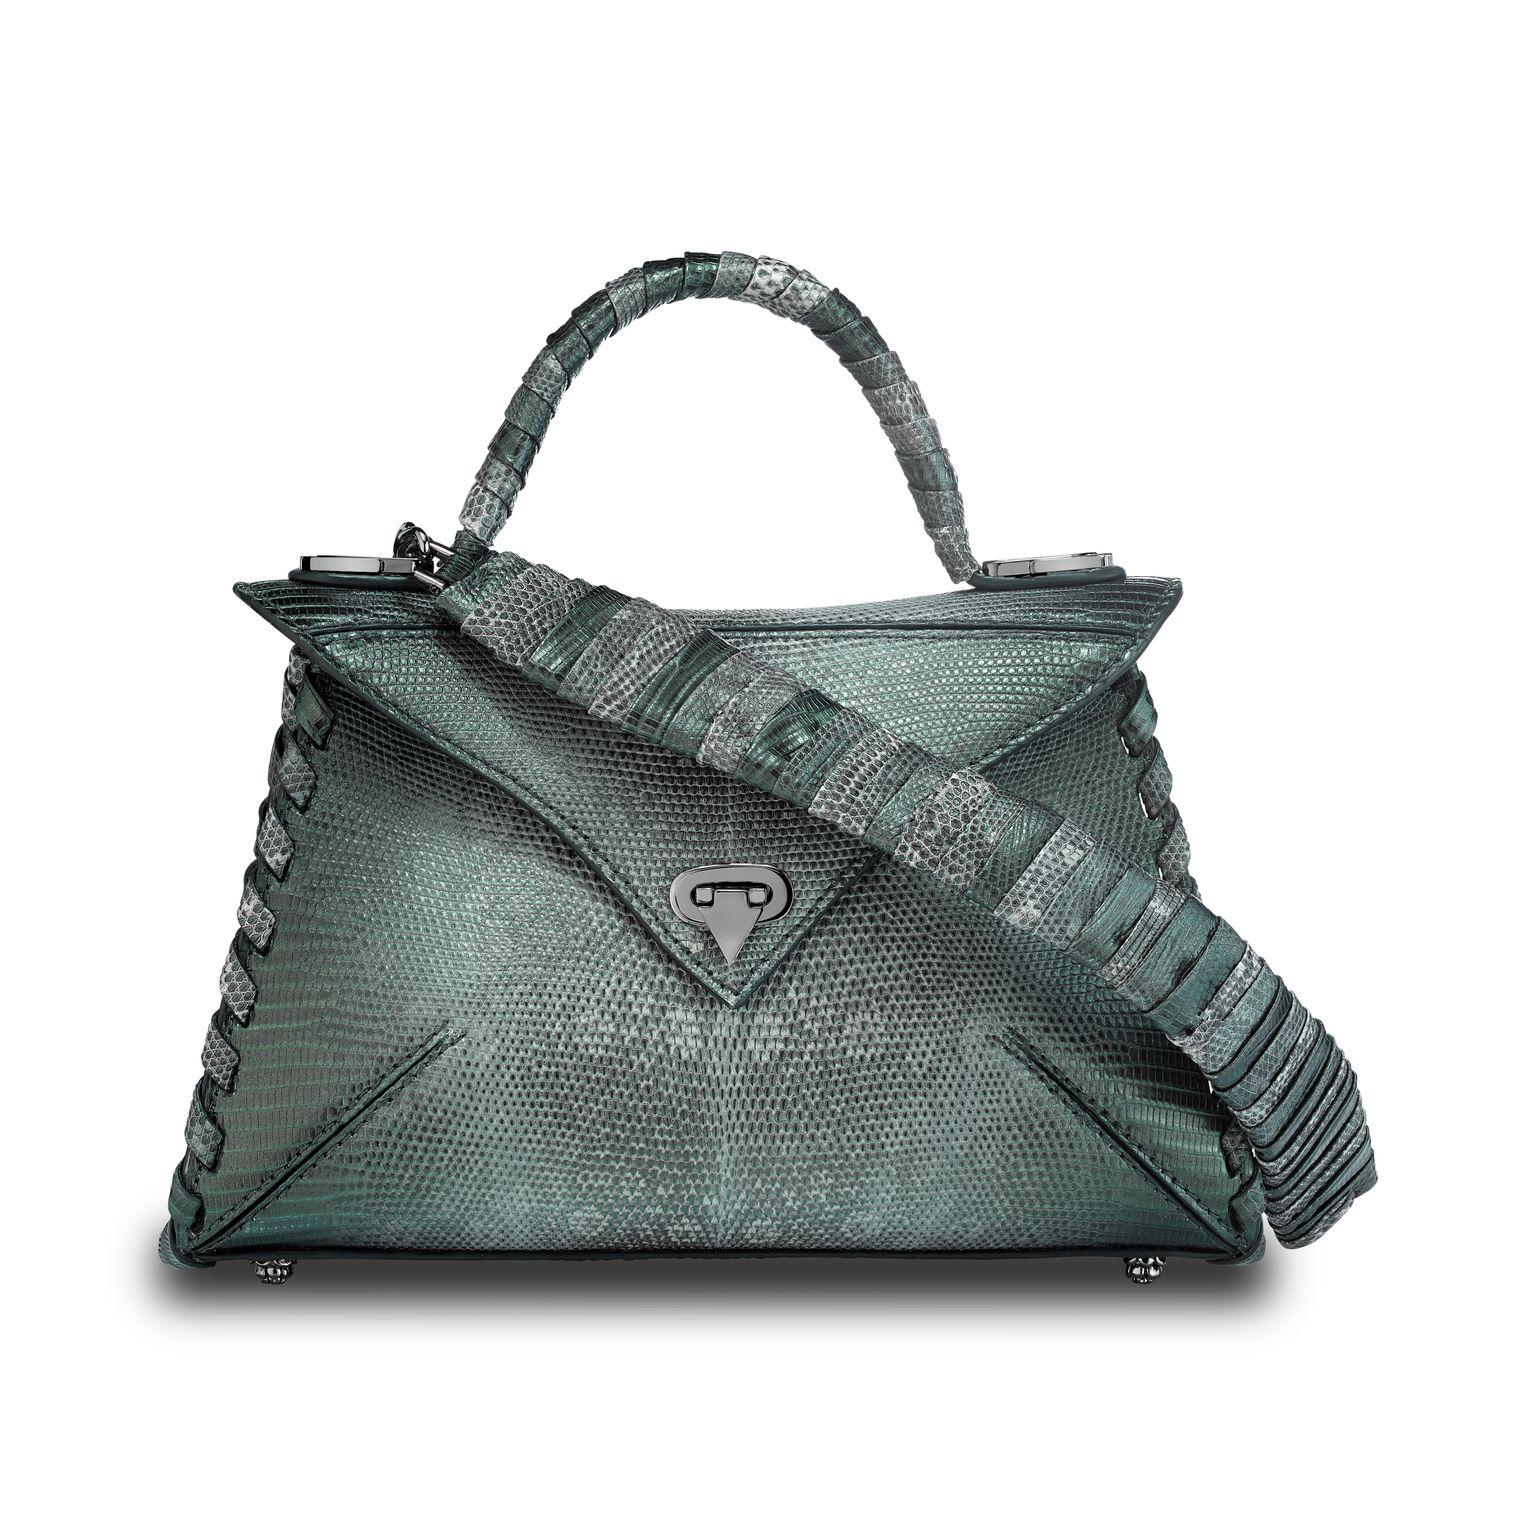 The LJ handbag small is featured in Peacock Lizard with gunmetal hardware. This semi-structured handbag has a triangular front-flap with our custom Spear-lock Closure. It is designed with a lizard-wrapped top-handle, handmade “whip-stitch” detail